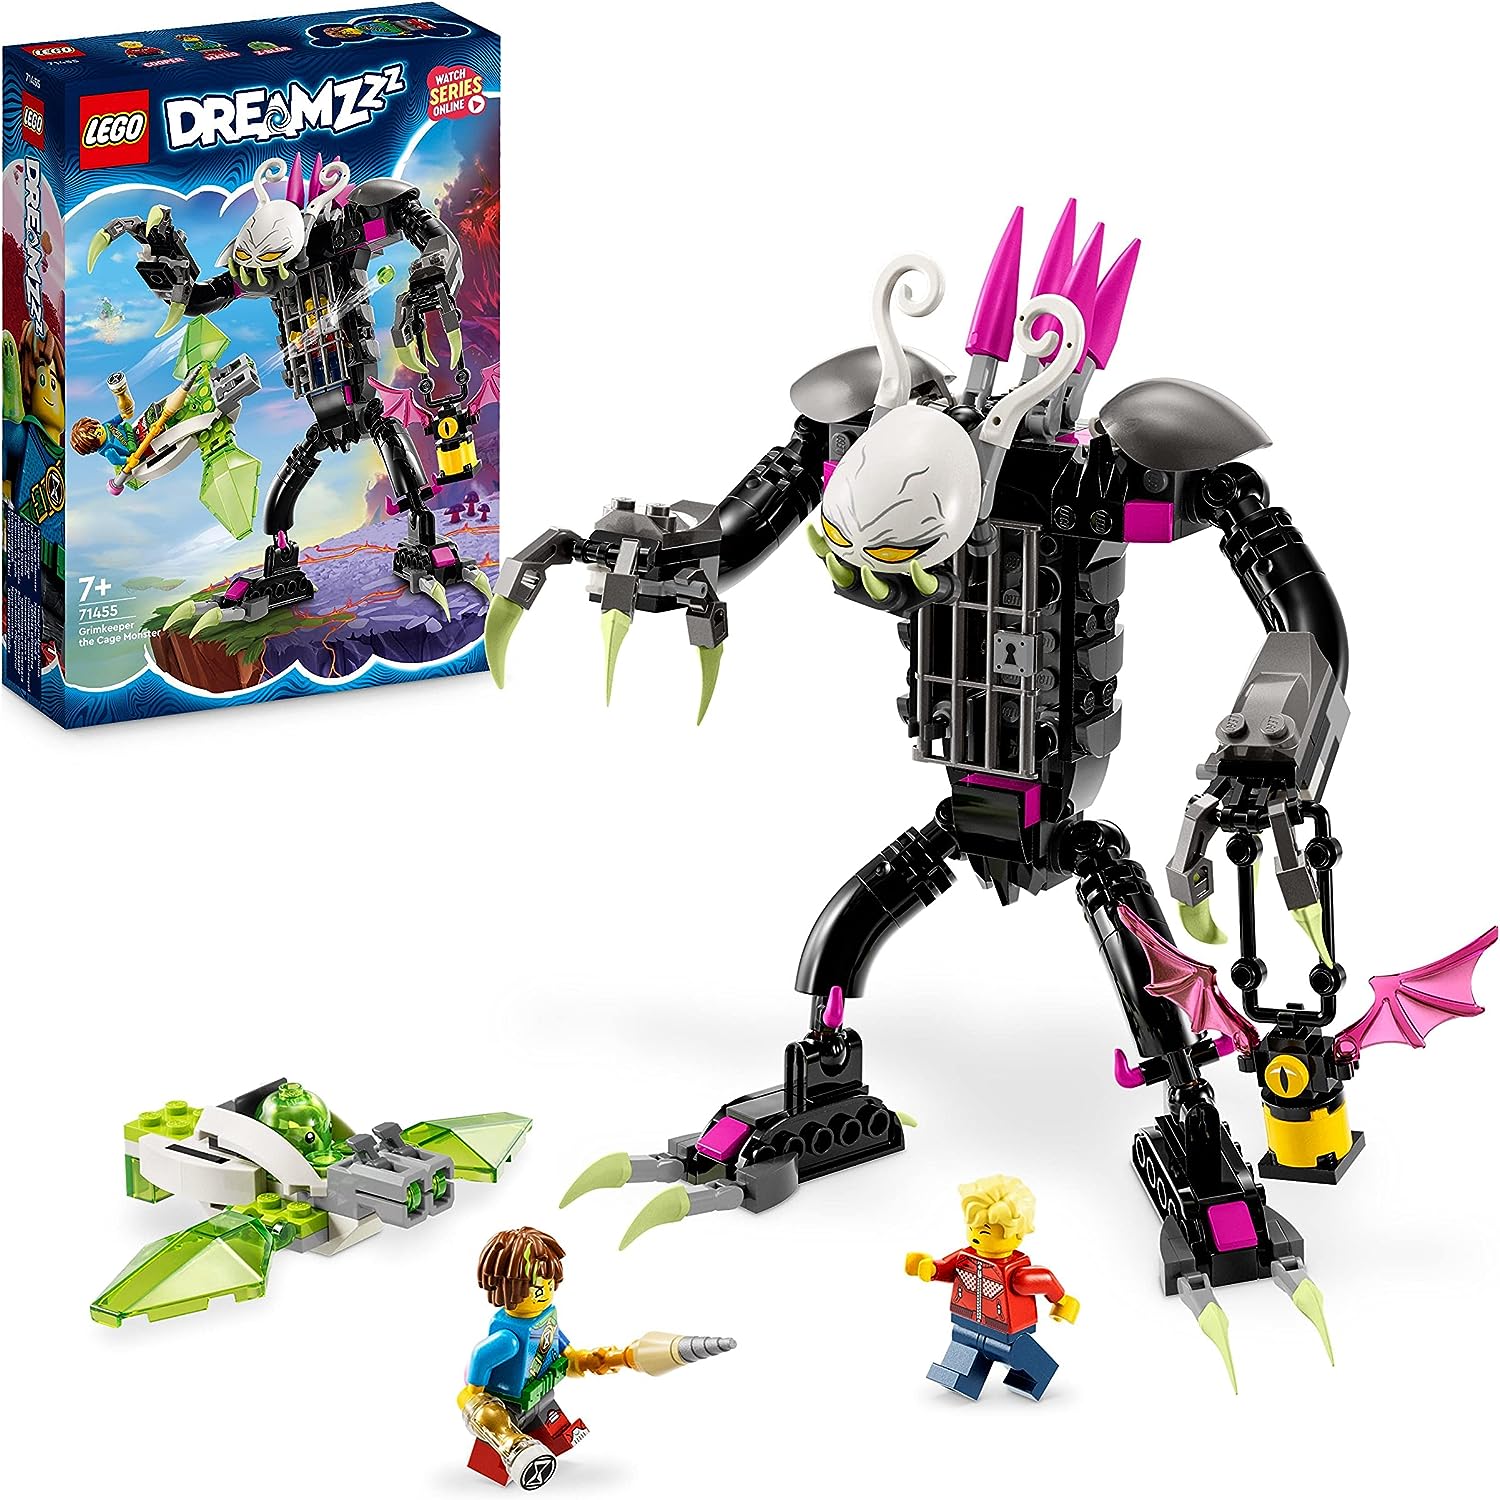 LEGO 71455 DREAMZzz the Albkeeper, Monster Figure Set, Turn Z-Blob into a Mini Plane or Hoverbike, with 2 Mini Figures from the TV Show, Toy for Children from 7 Years